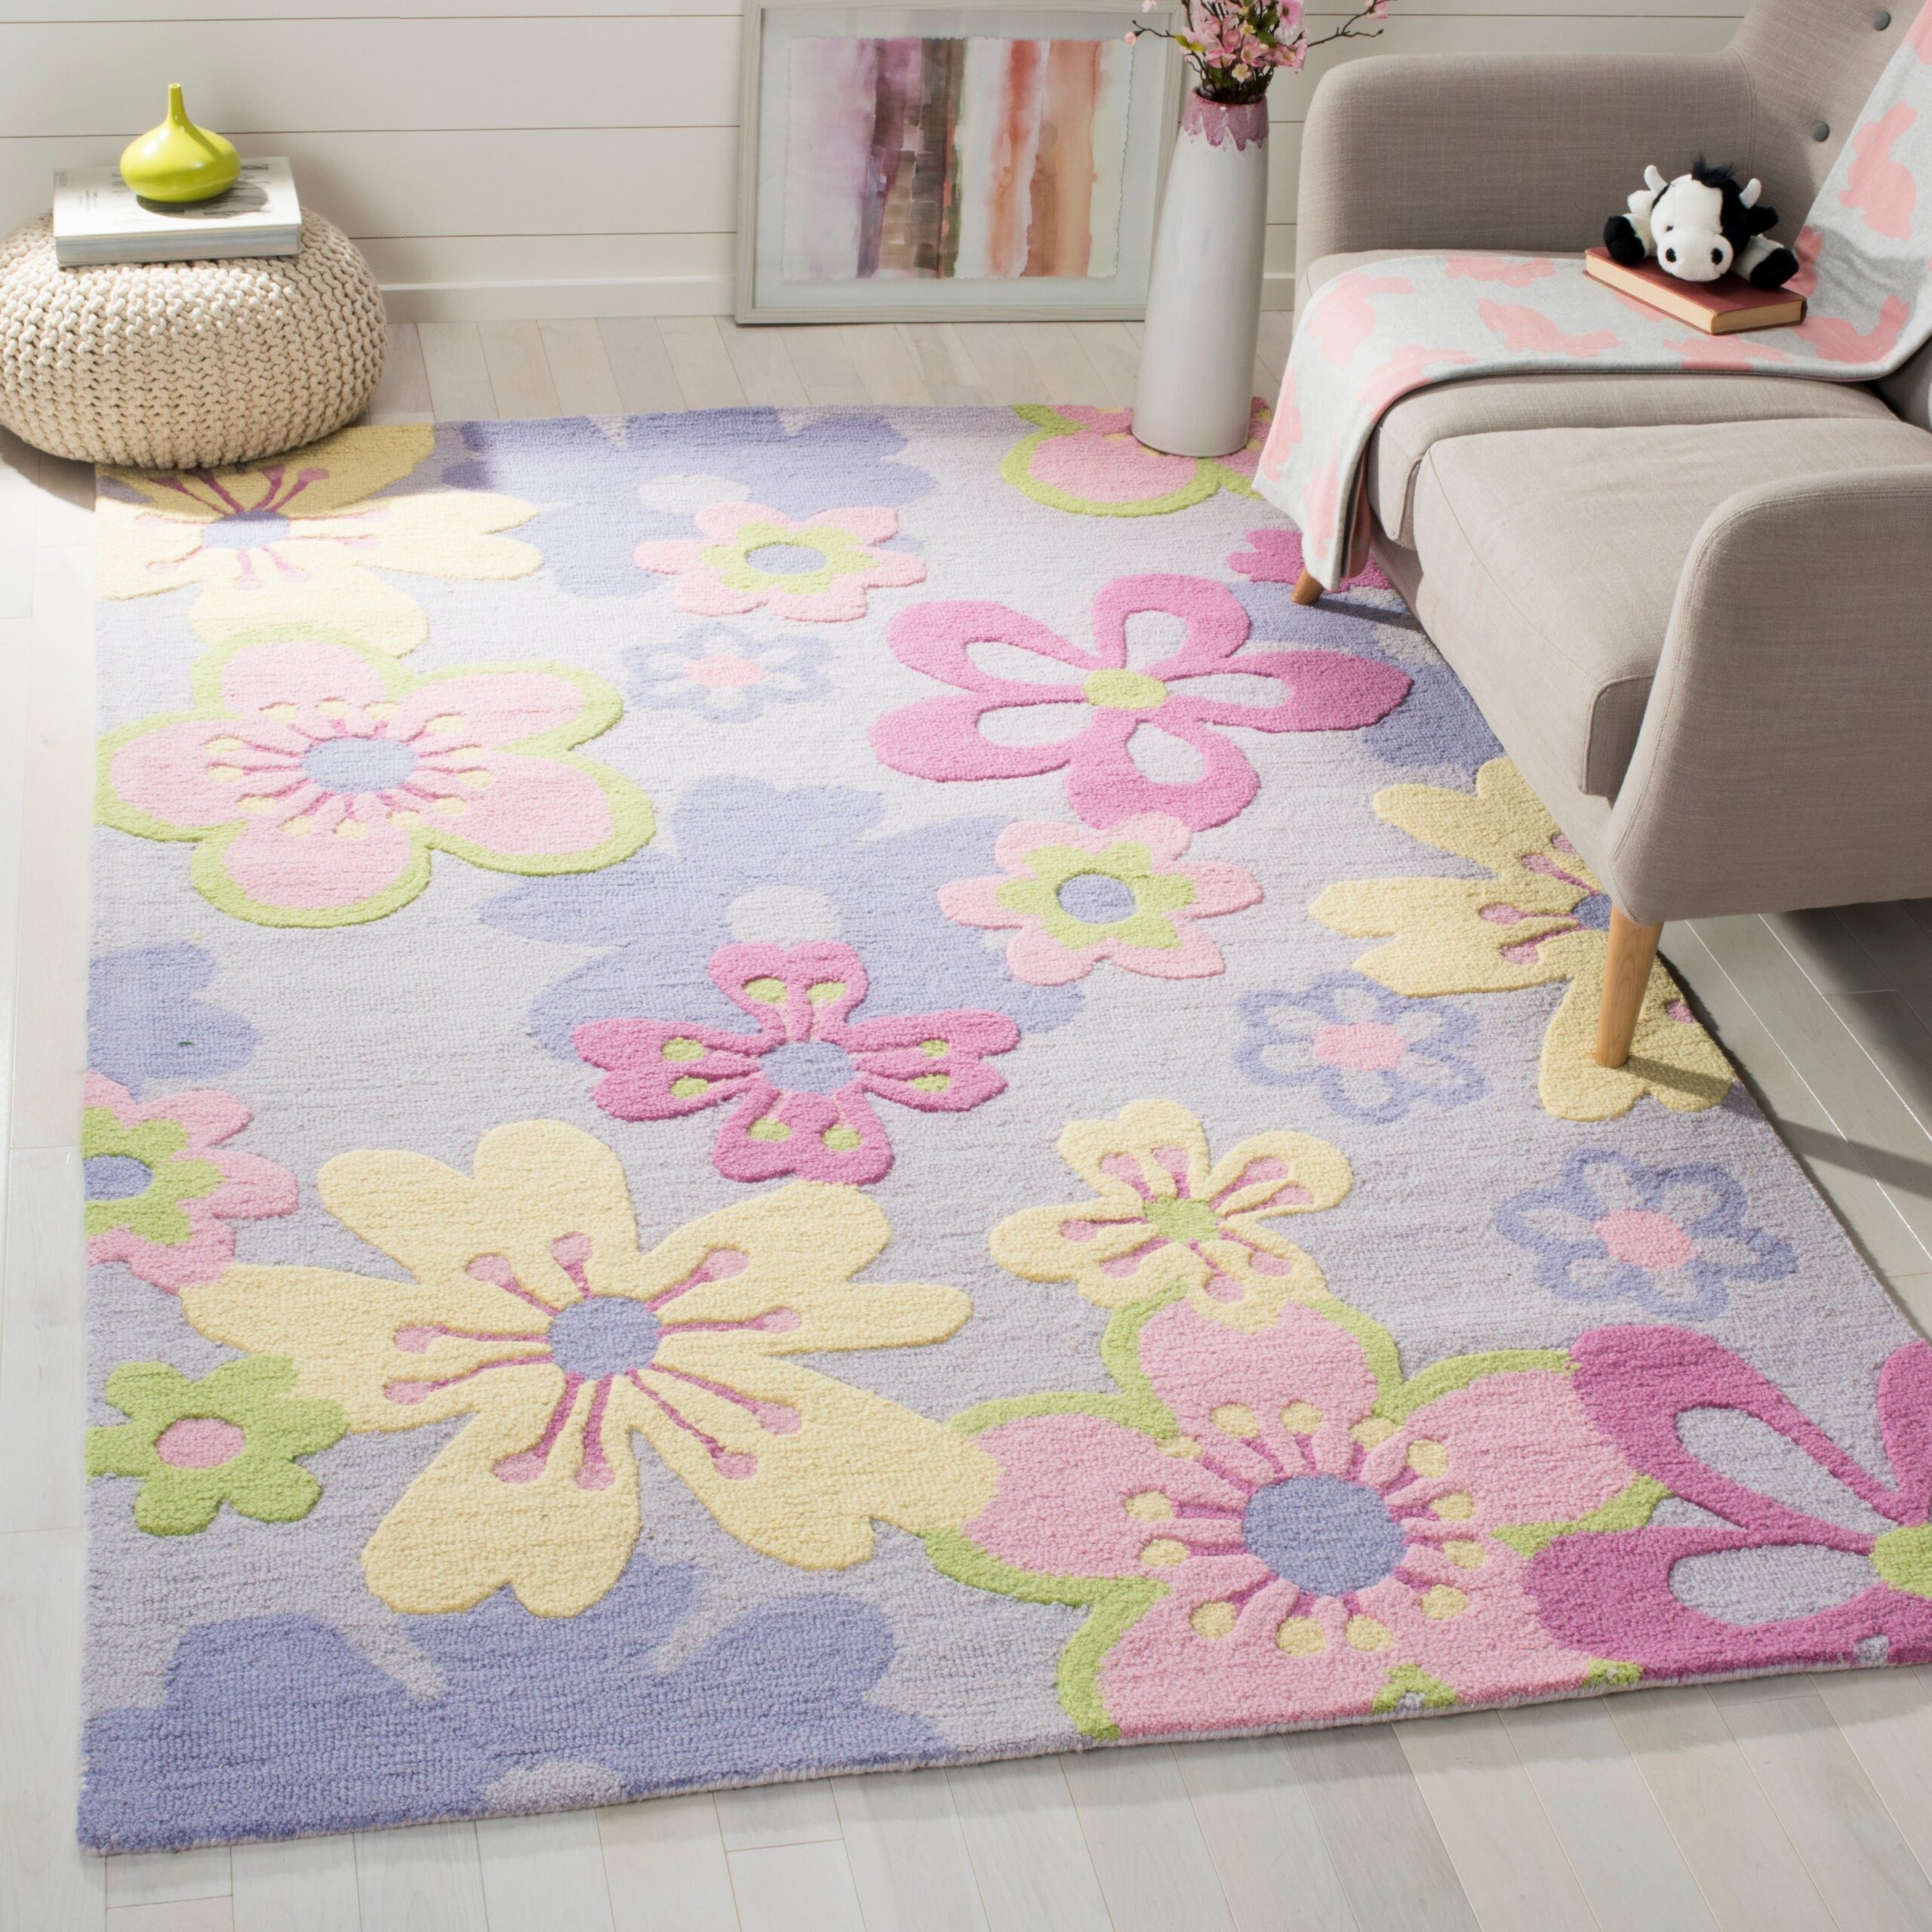 Useful and beautiful rugs for girls